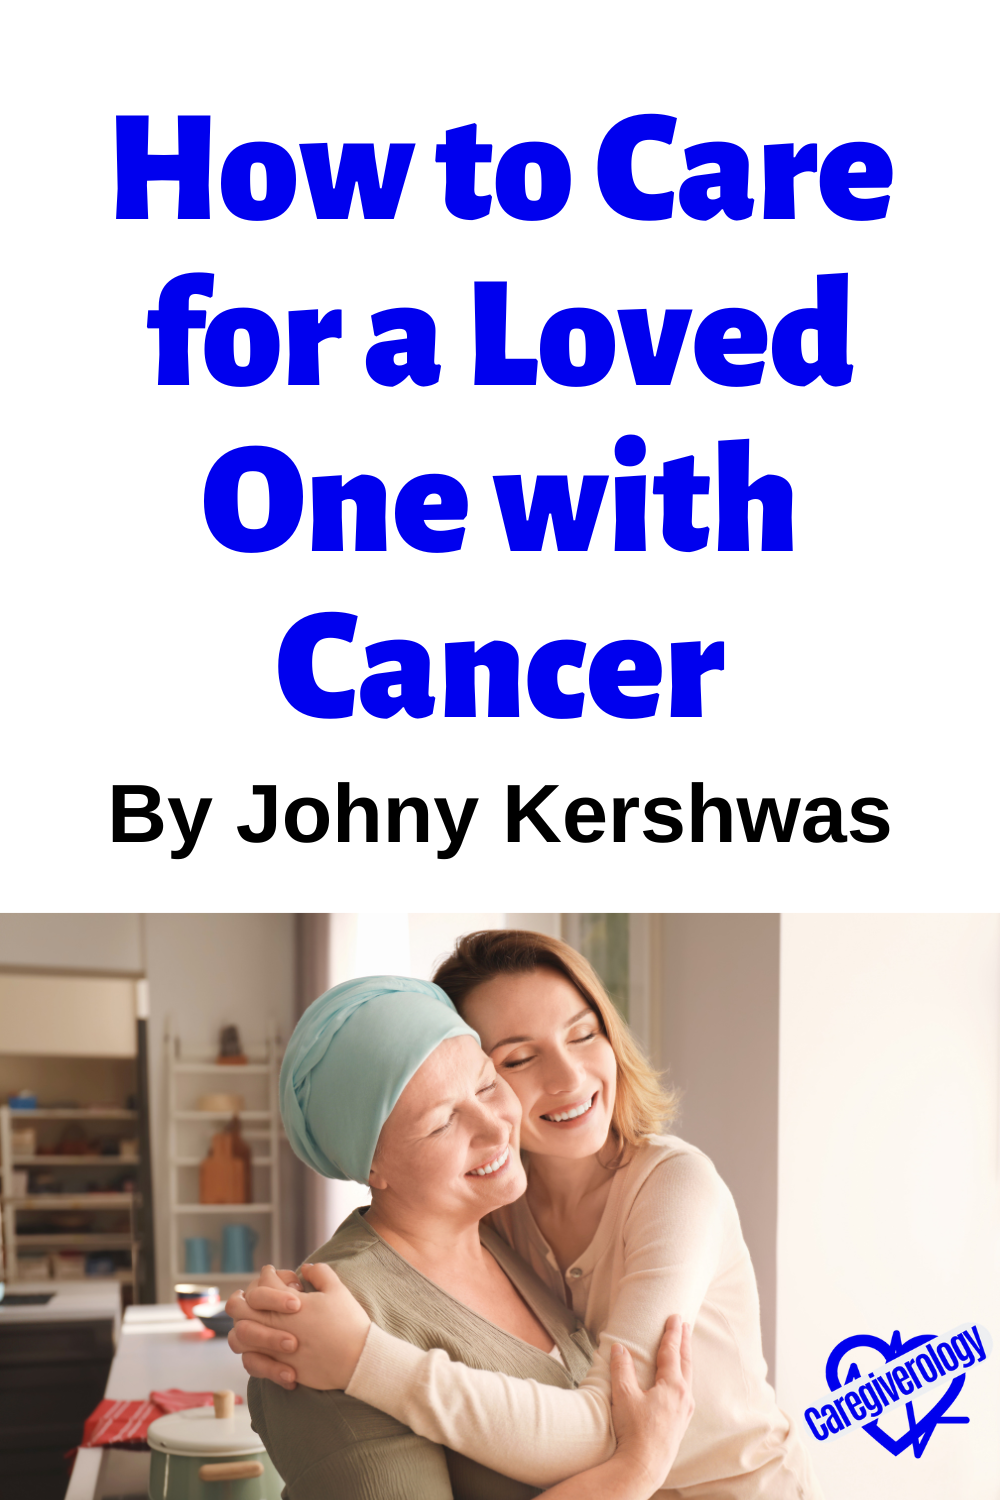 How to Care for a Loved One with Cancer